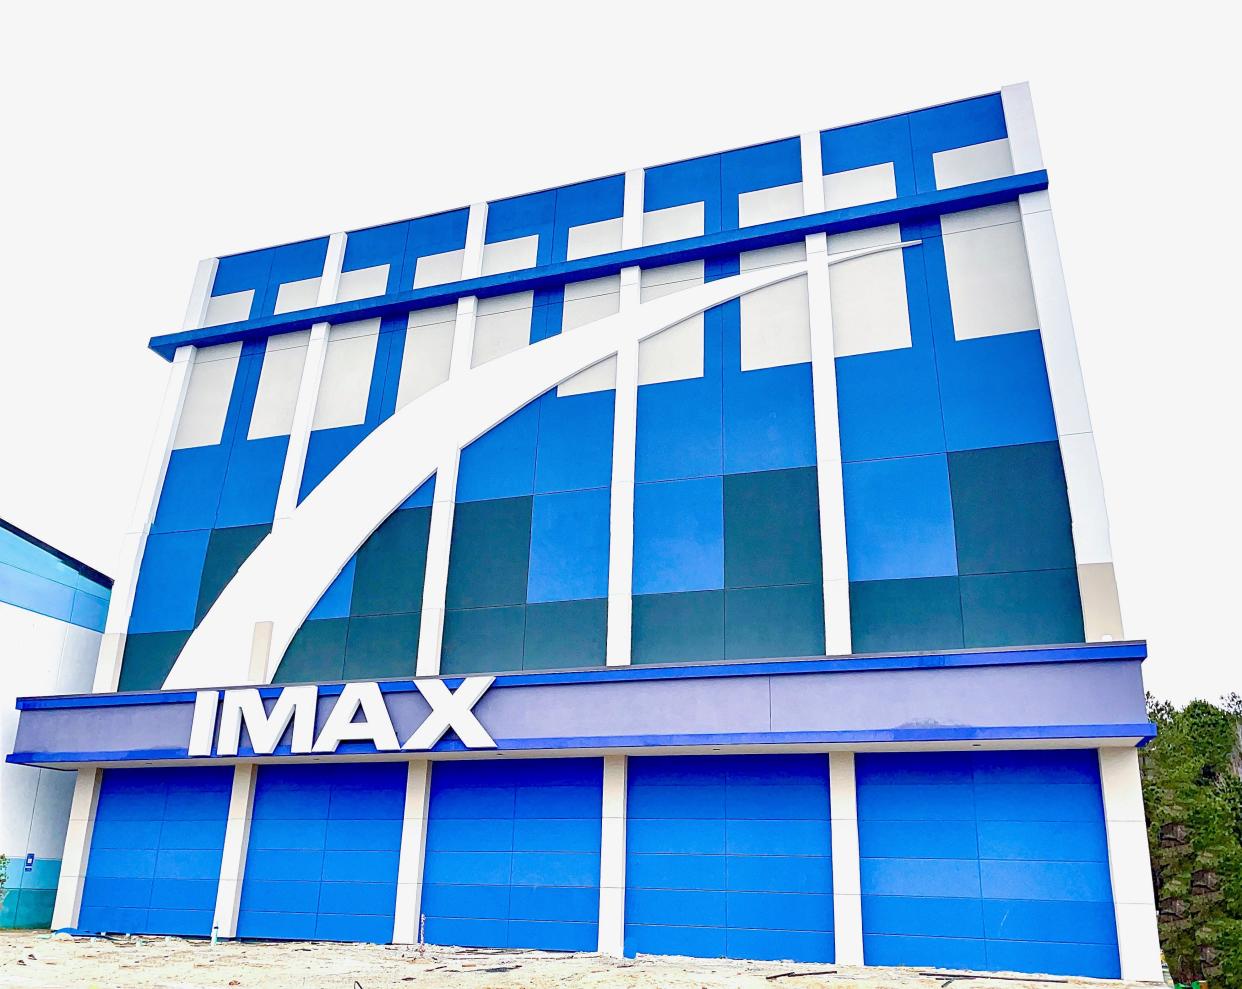 The new IMAX theater will open in Pooler in February.